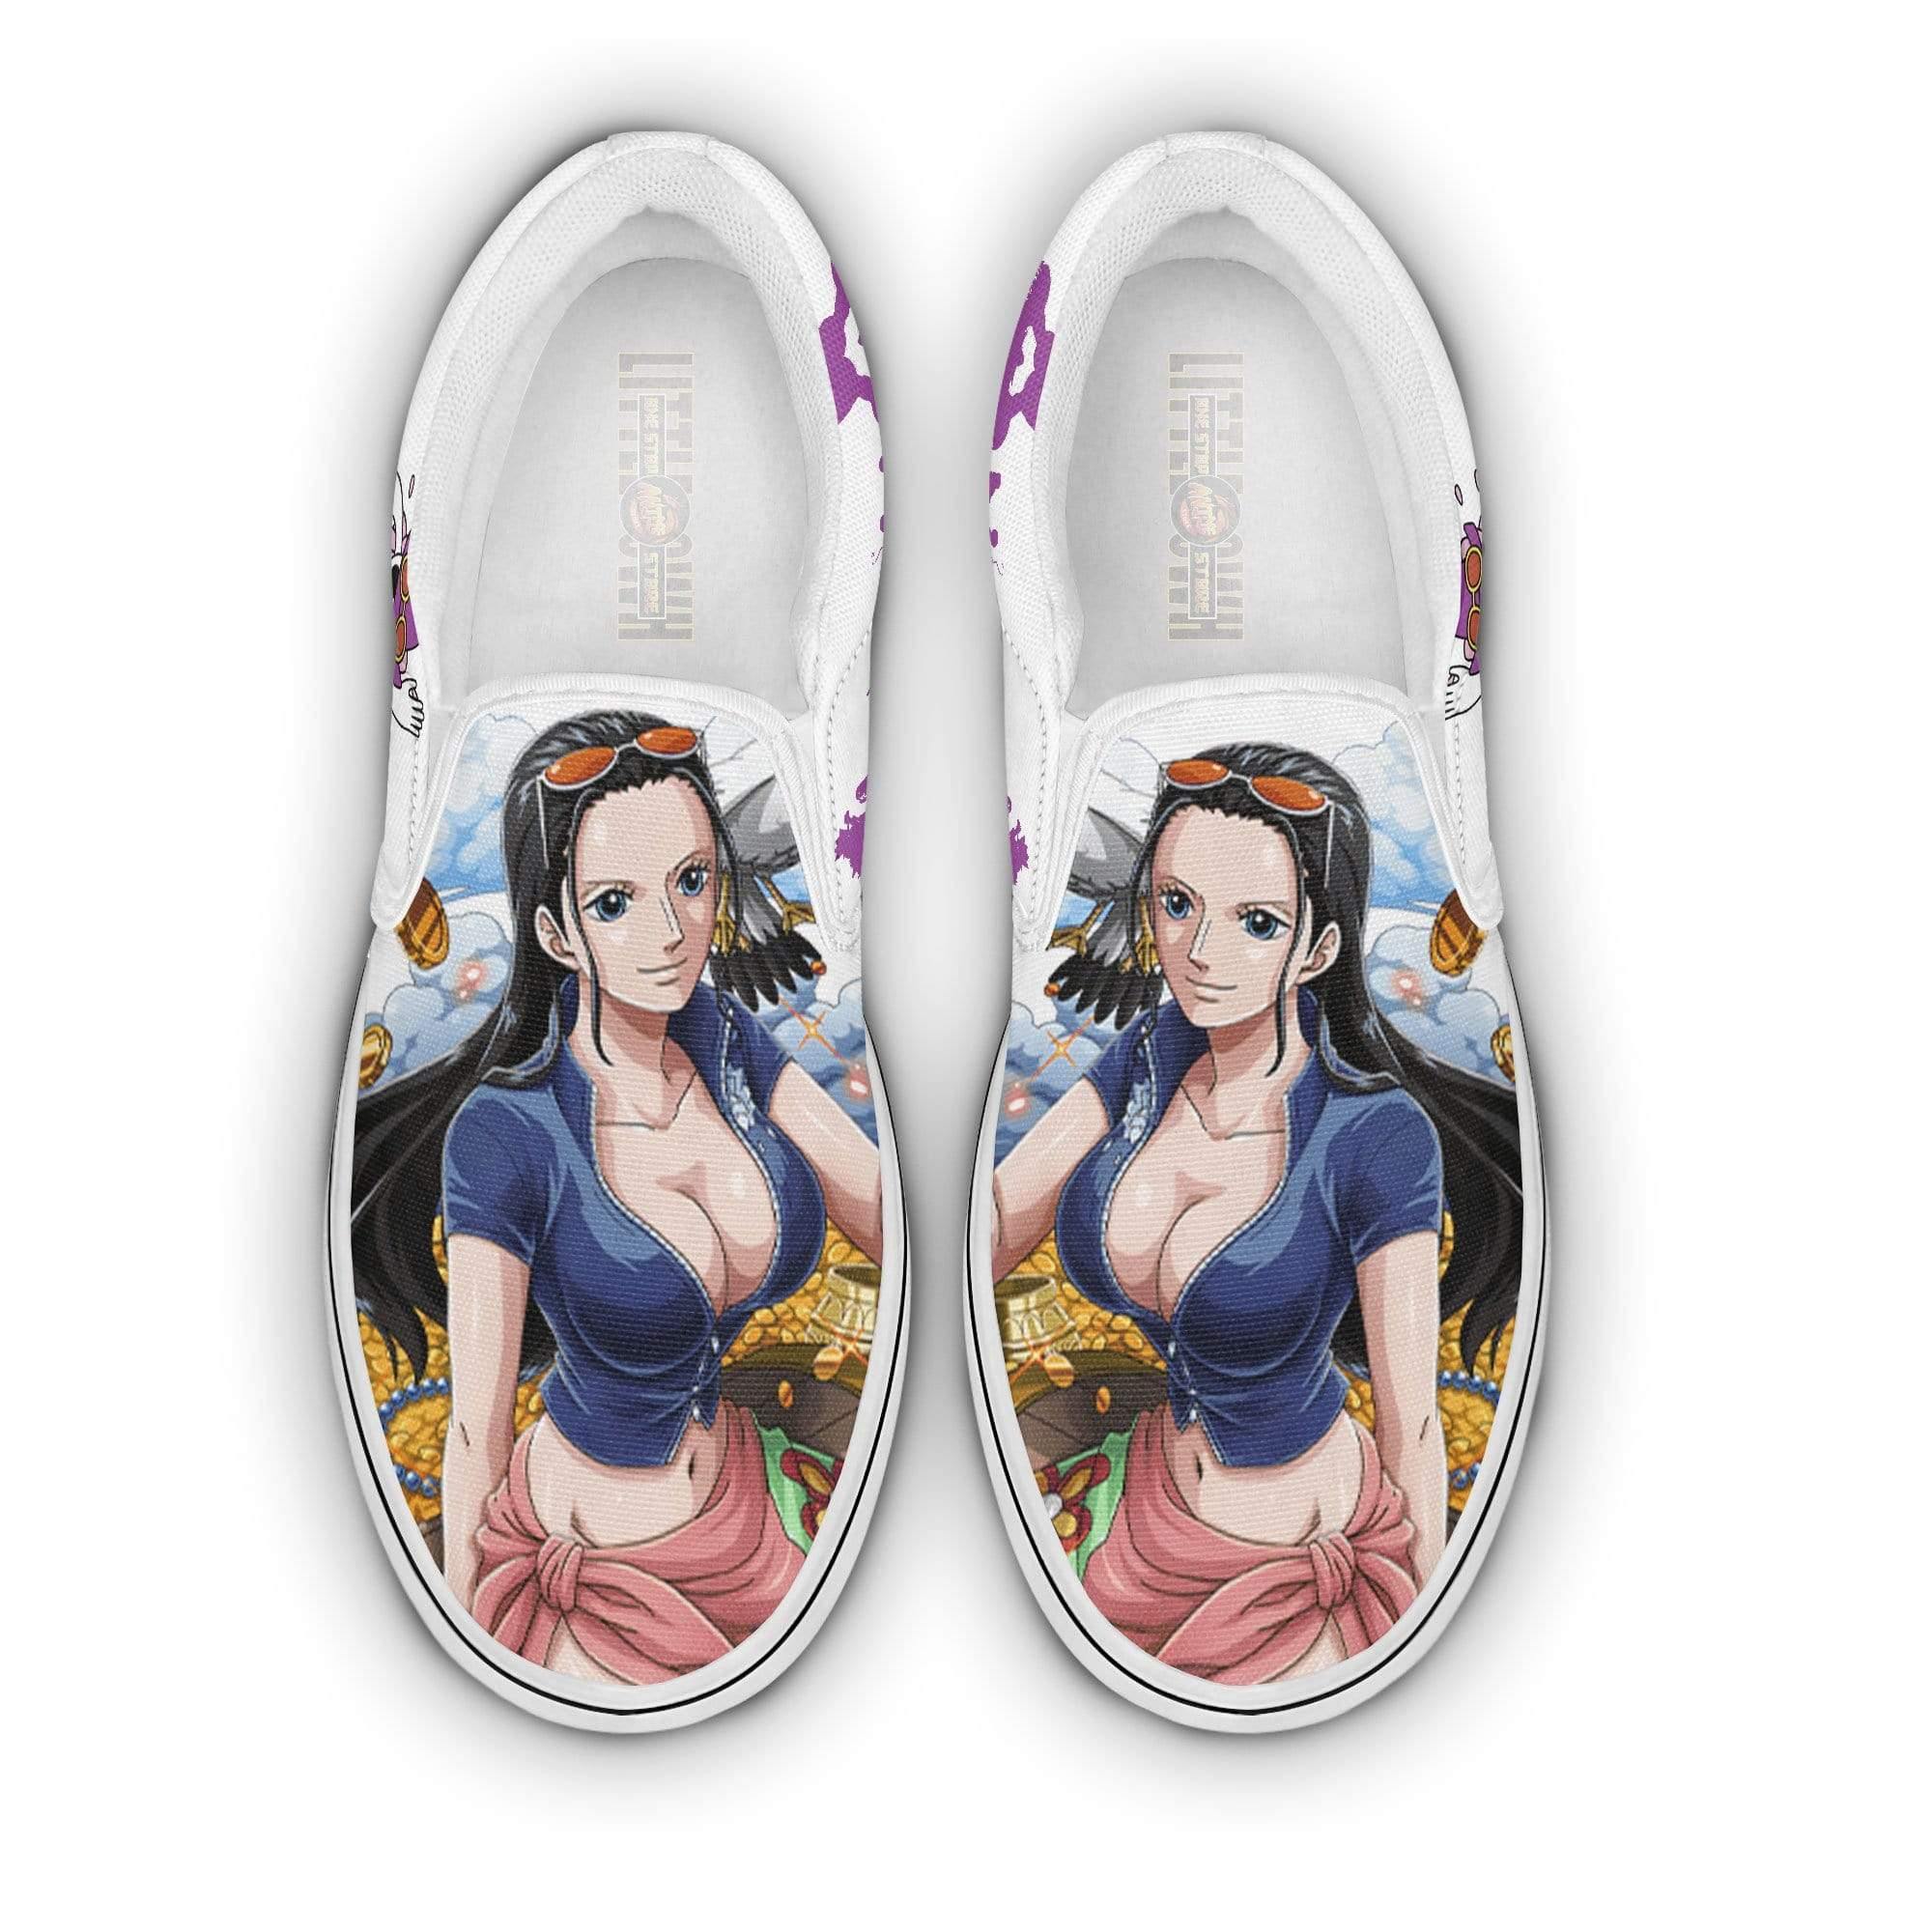 One Piece Anime Shoes Nico Robin Classic Slip Ons Sneakers